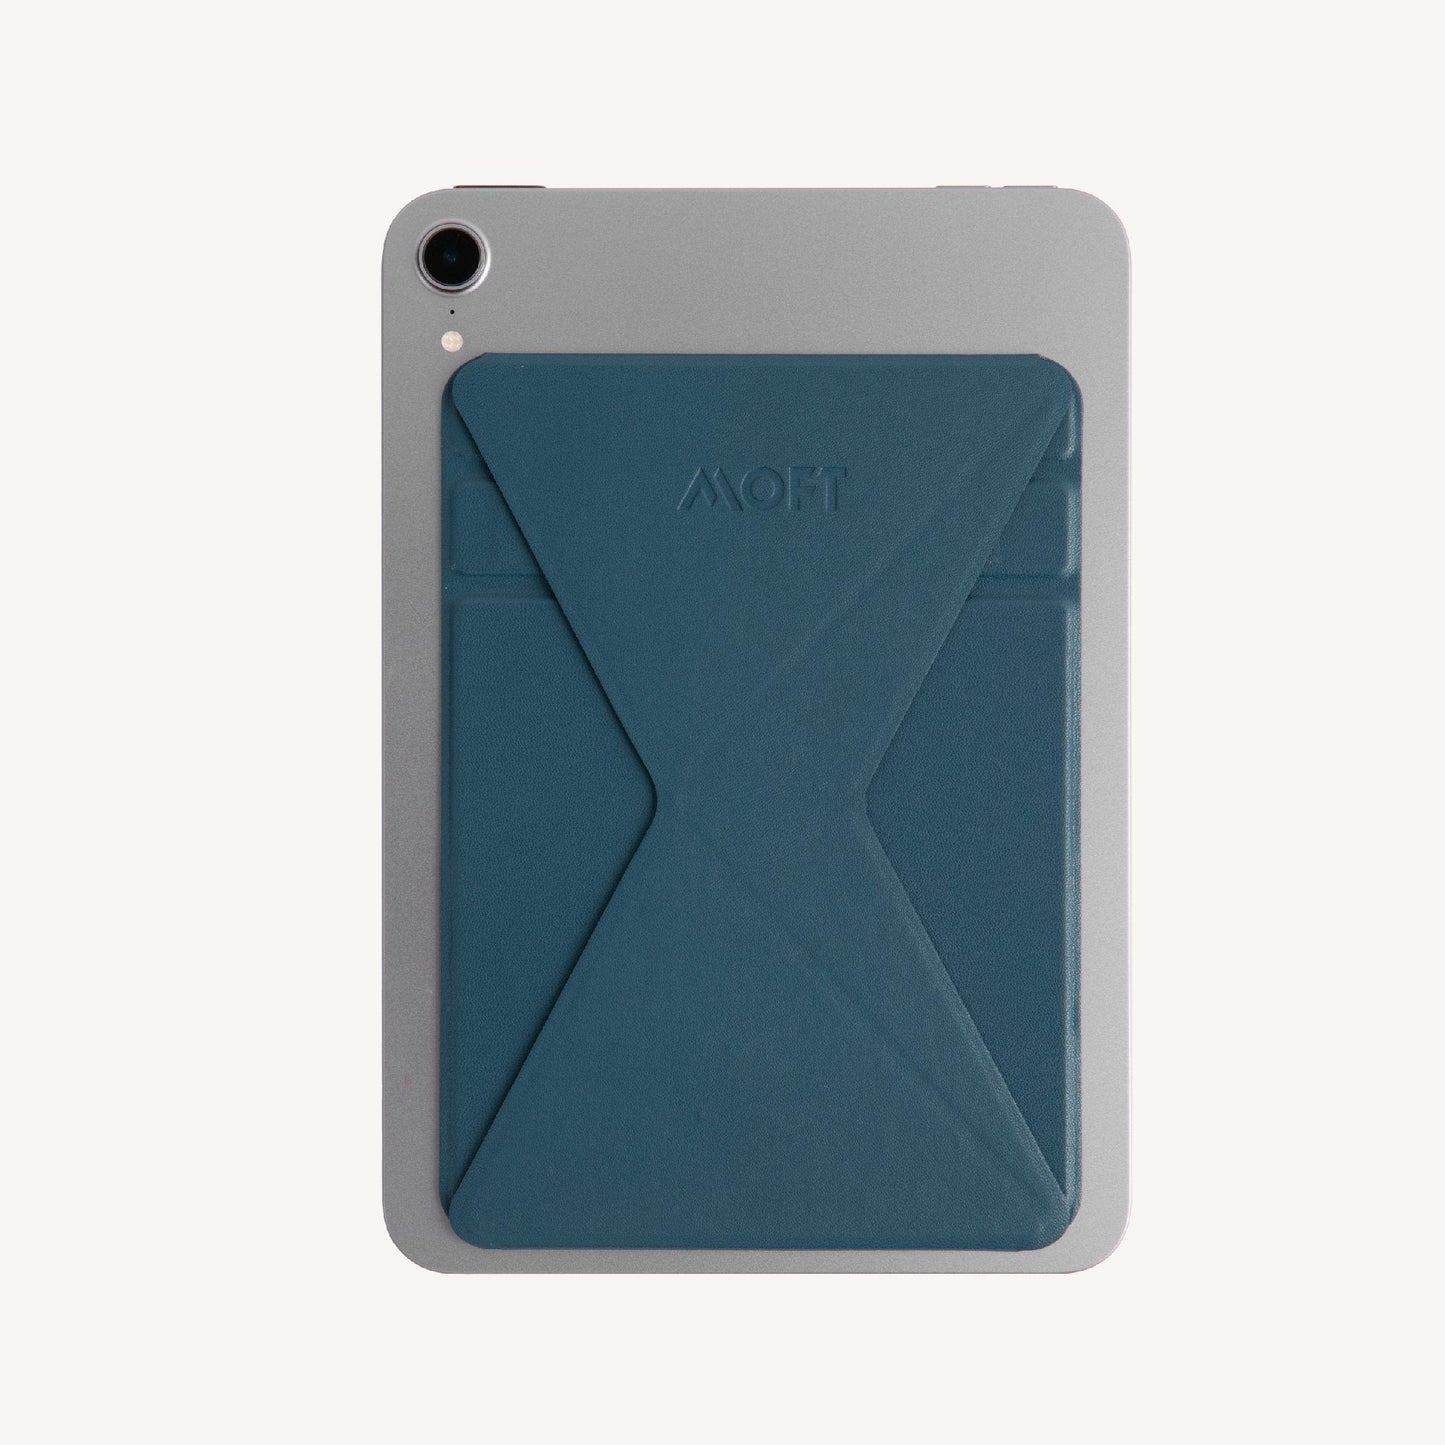 Invisible Tablet Stand For Tablets MS008&9 For iPad Mini - Wanderlust Blue 